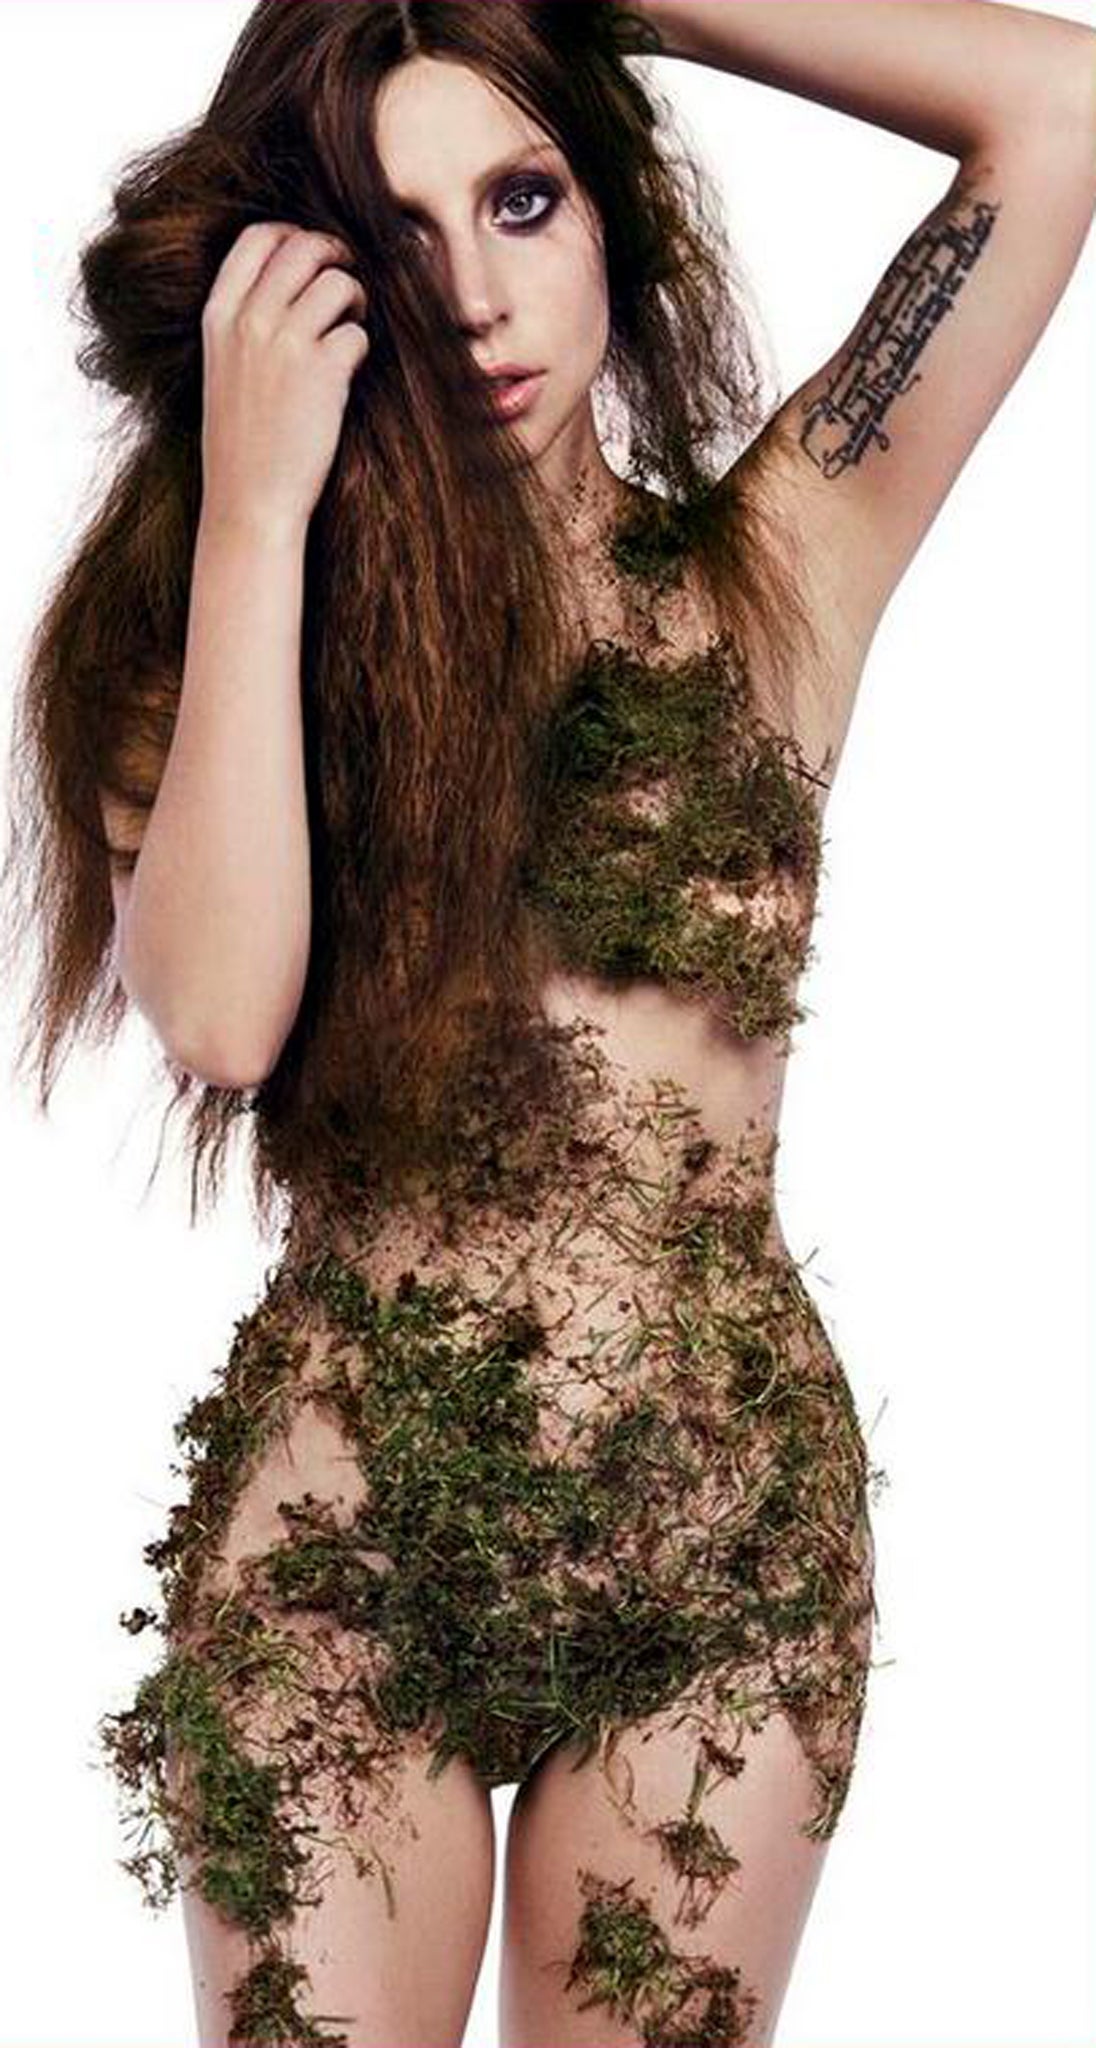 Lady Gaga wears a moss dress to promote her new single 'Do What U Want'